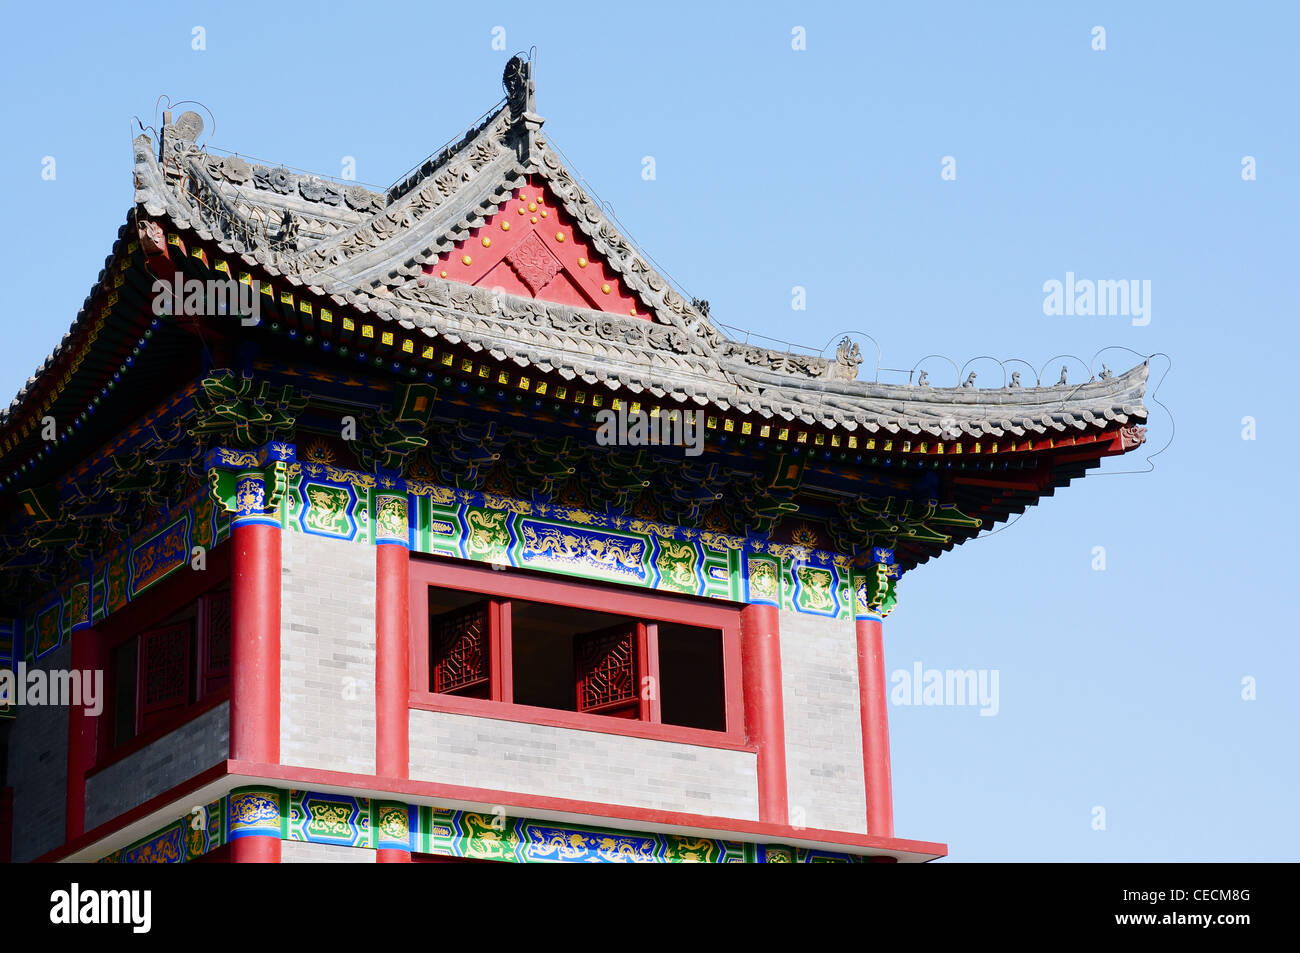 building asian asia chinese ancient china architecture traditional temple design red culture decoration history symbol old Stock Photo